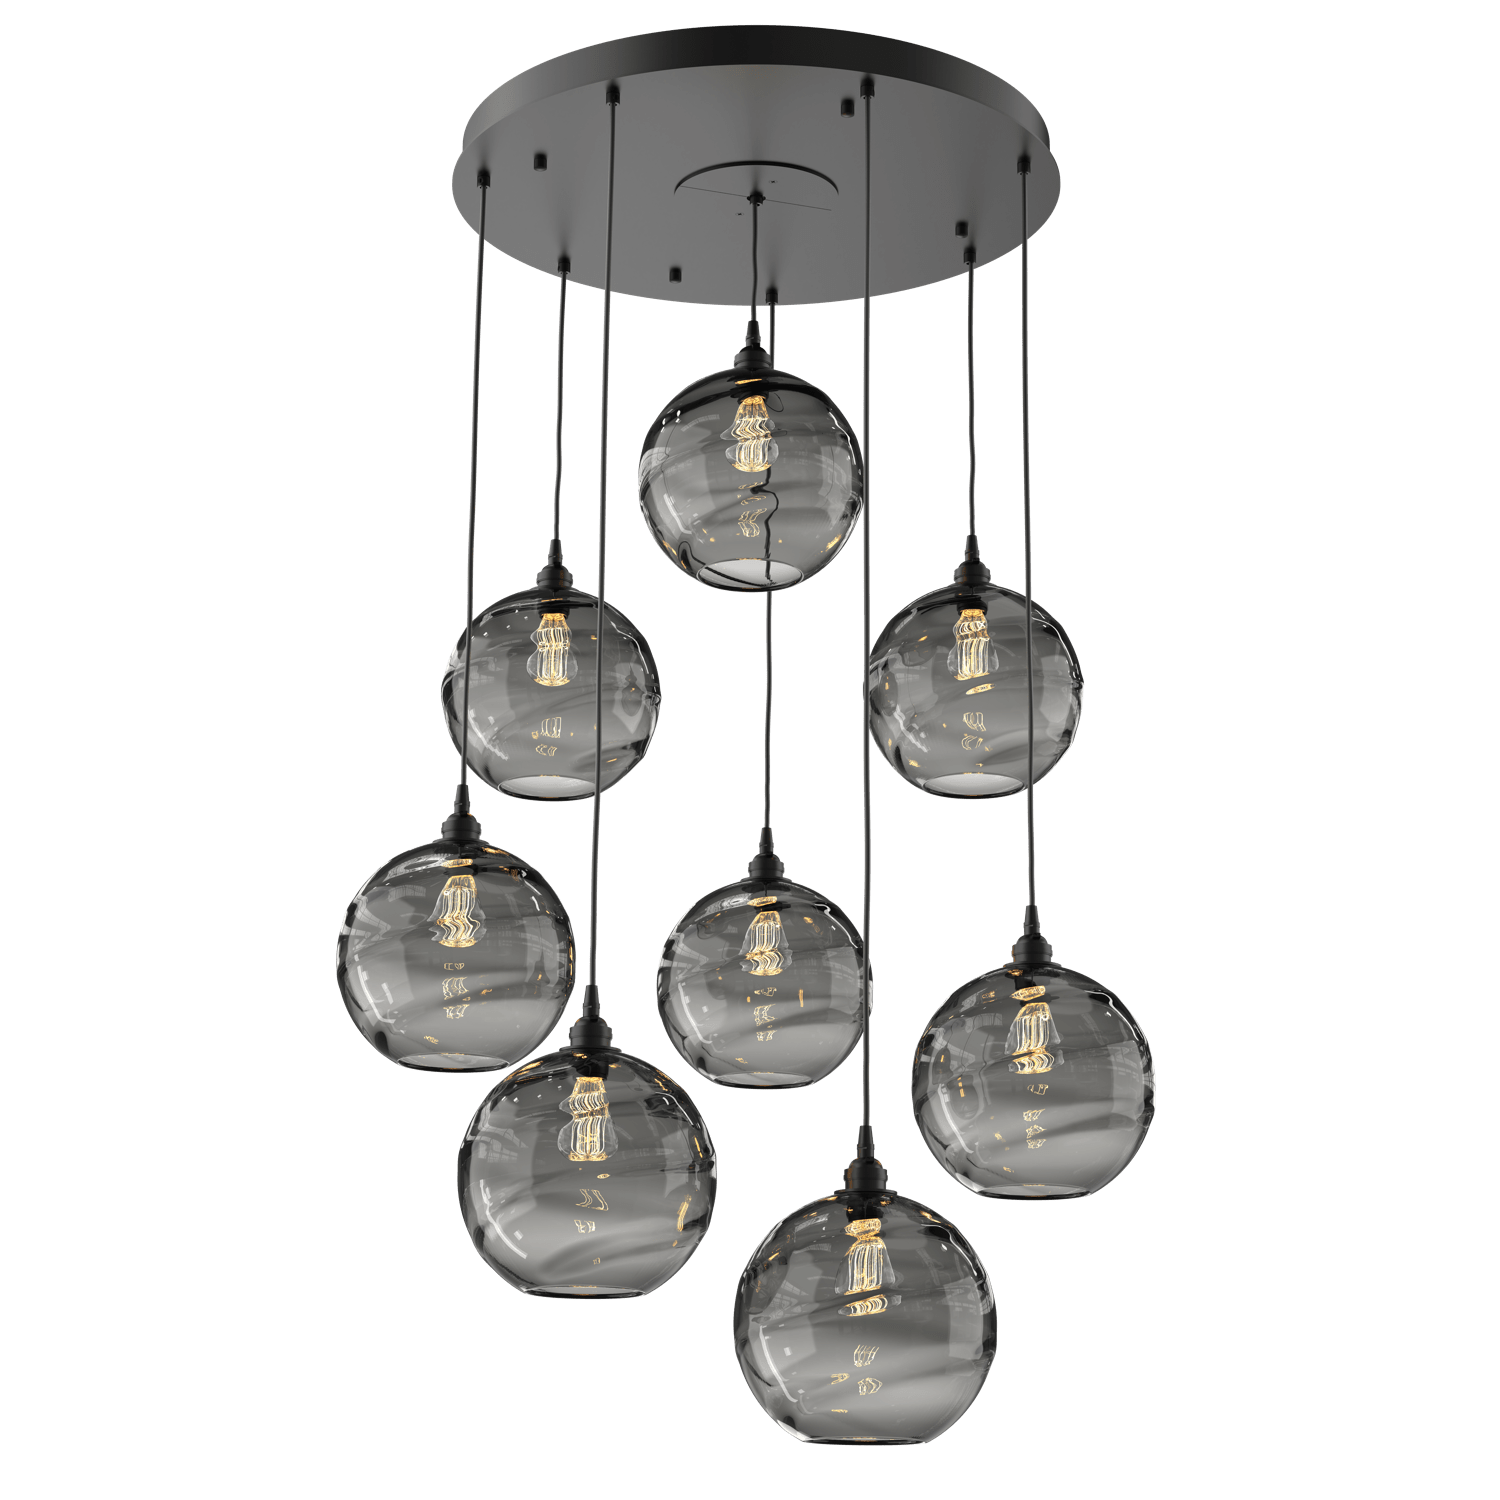 CHB0047-08-MB-OS-Hammerton-Studio-Optic-Blown-Glass-Terra-8-light-round-pendant-chandelier-with-matte-black-finish-and-optic-smoke-blown-glass-shades-and-incandescent-lamping